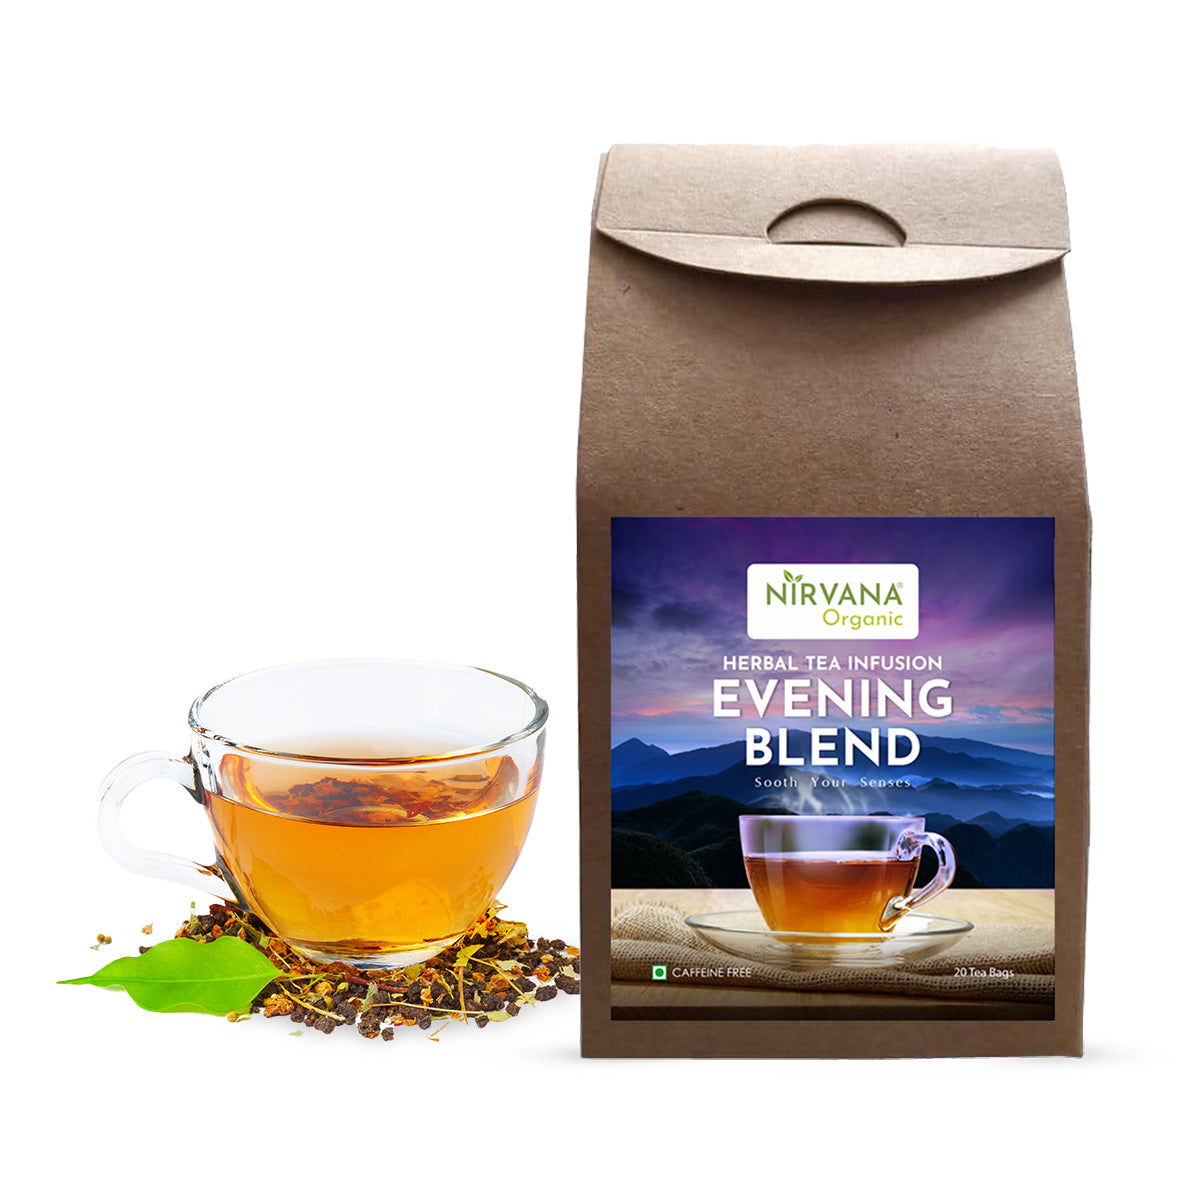 Evening Blend Herbal Tea Infusion